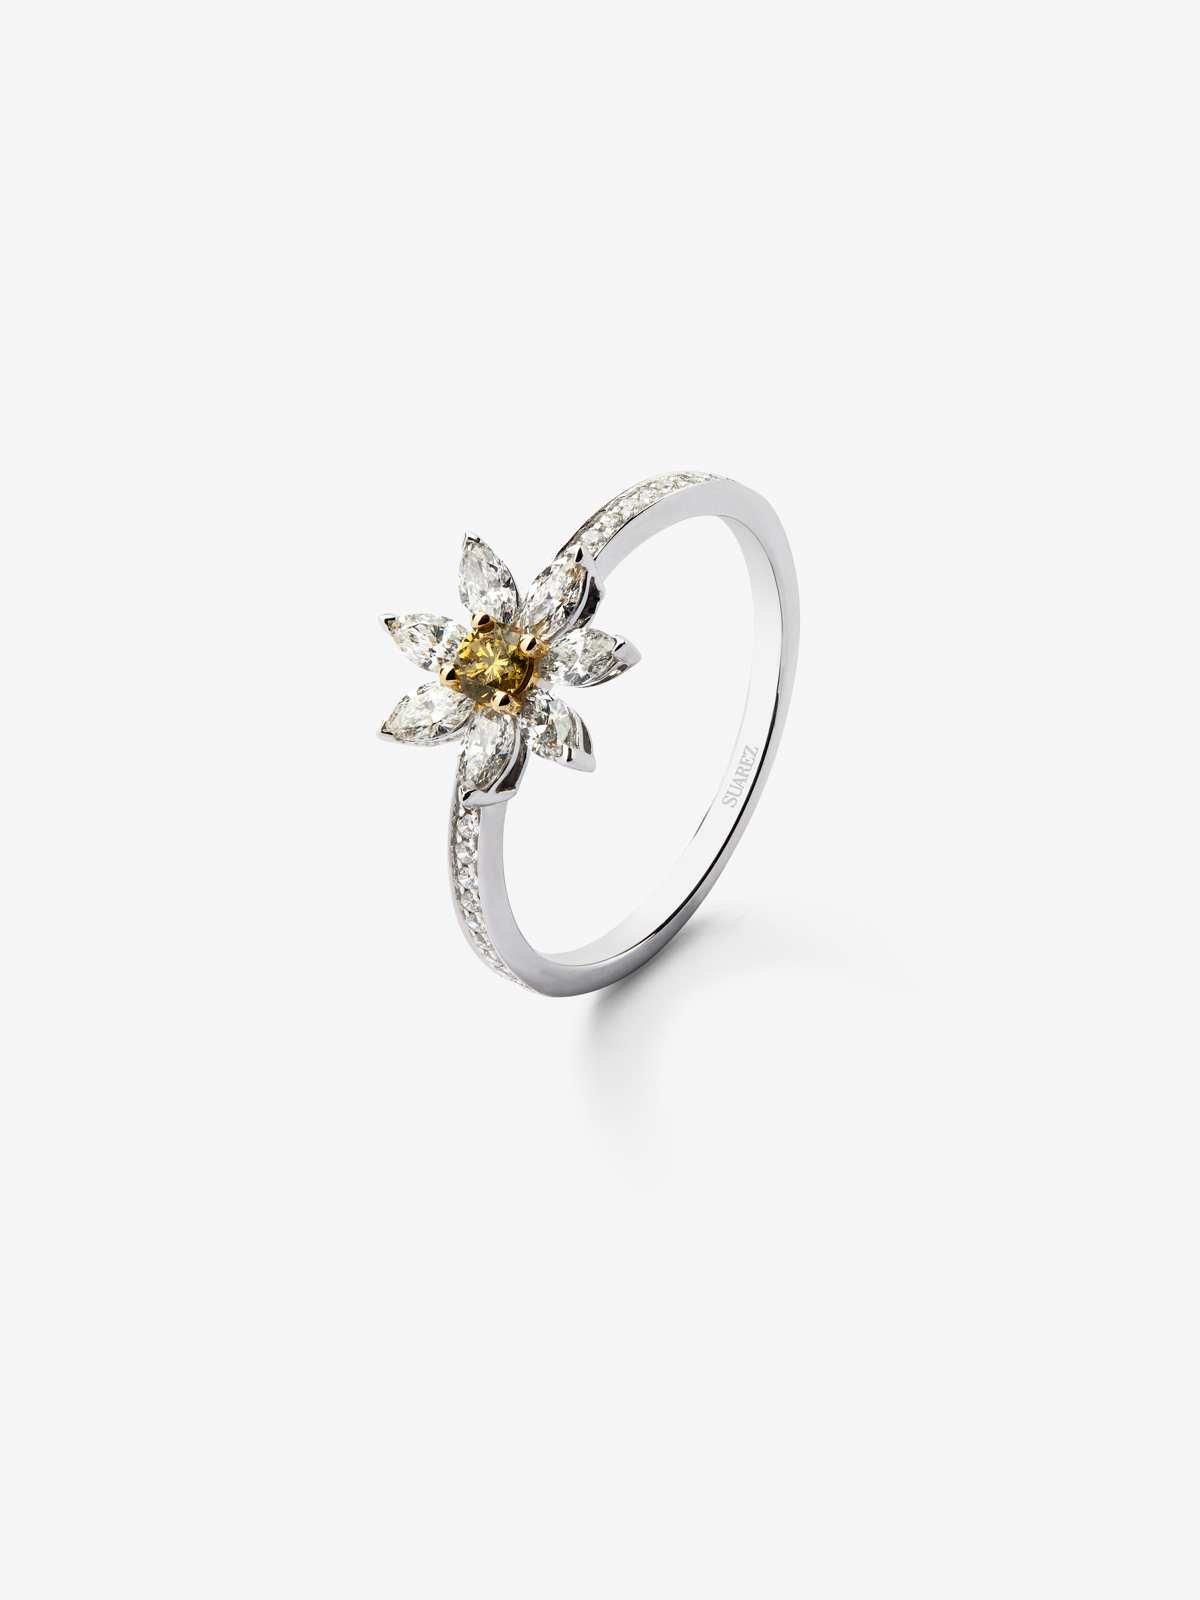 18K white gold ring with 0.16 ct brilliant-cut white and yellow diamonds and star shape